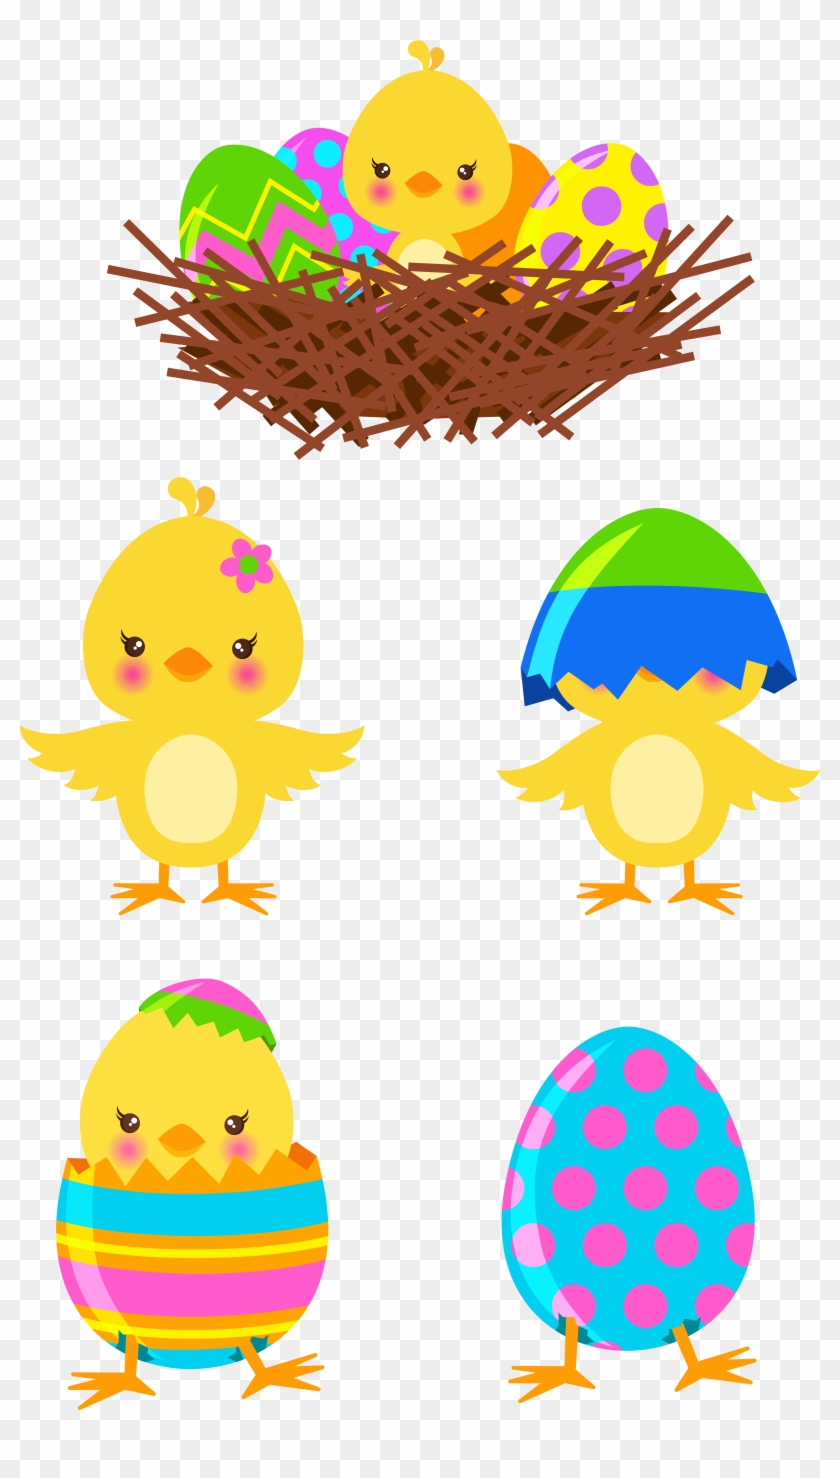 Clipart Images Collection Easter Chick Images Pictures - Clipart Images Collection Easter Chick Images Pictures #207172